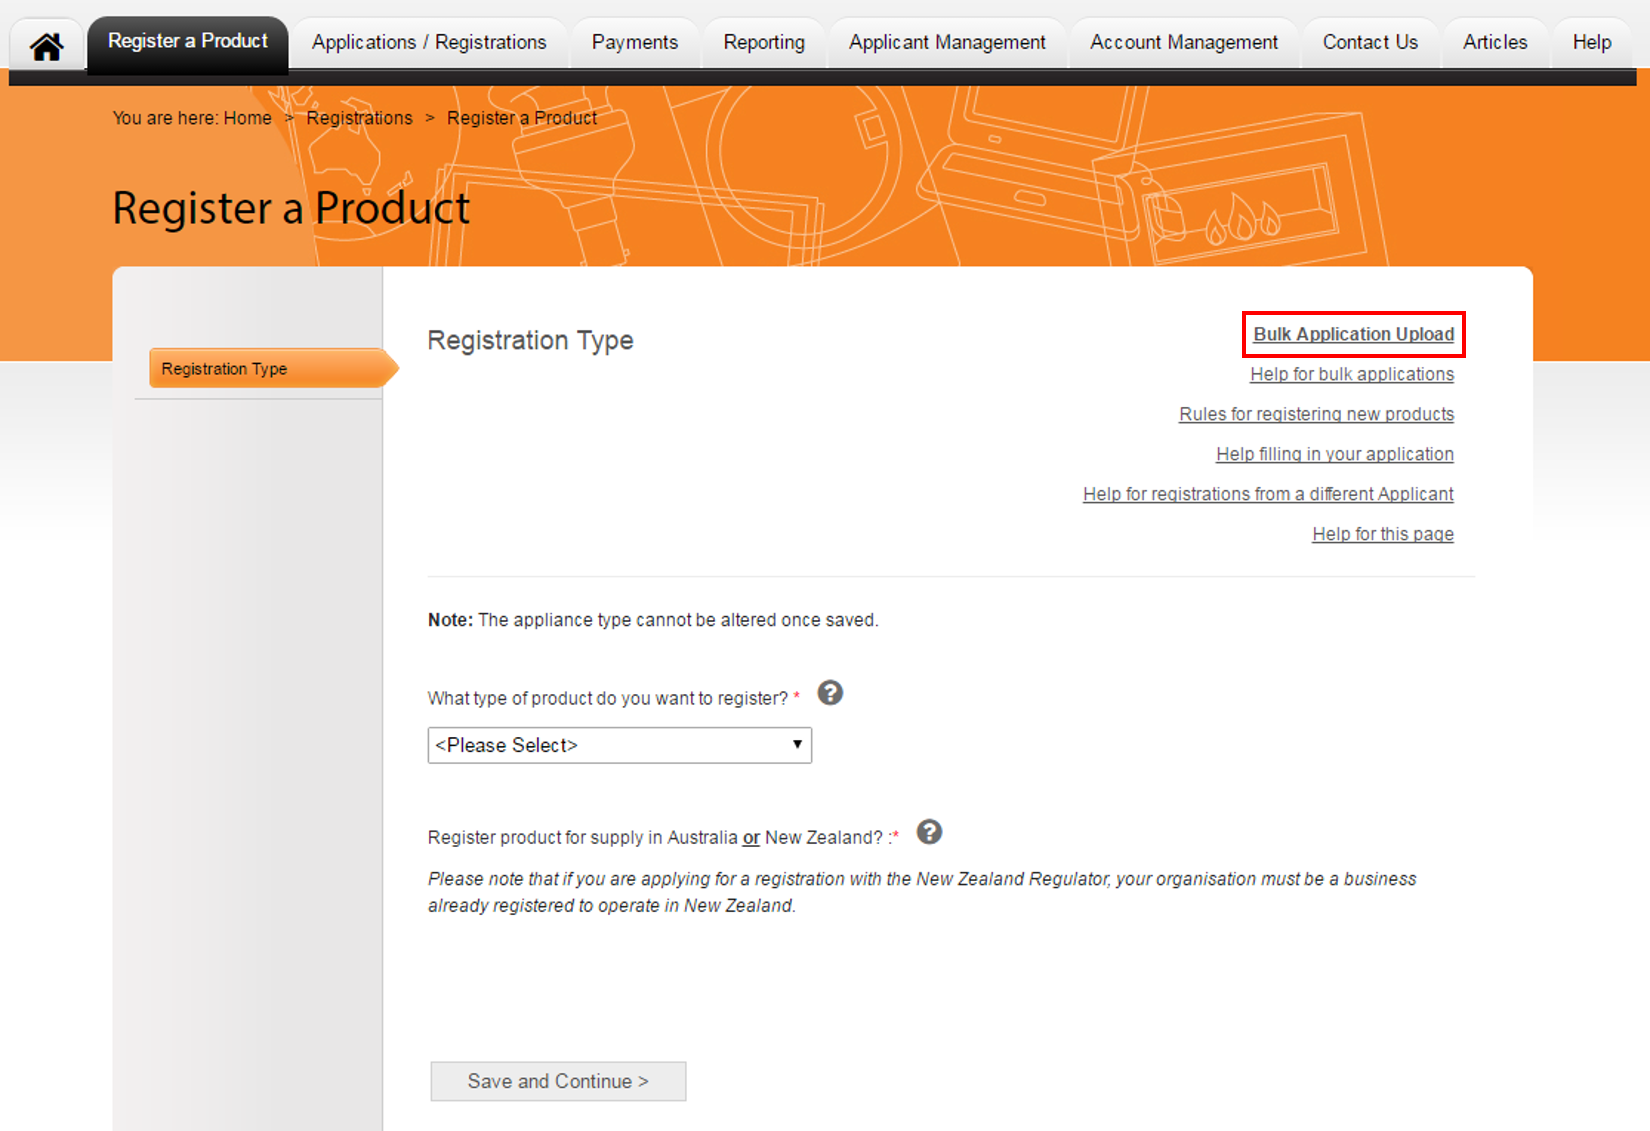 Screenshot of the "Registration Type" registration page with the "Bulk Application Upload" link highlighted